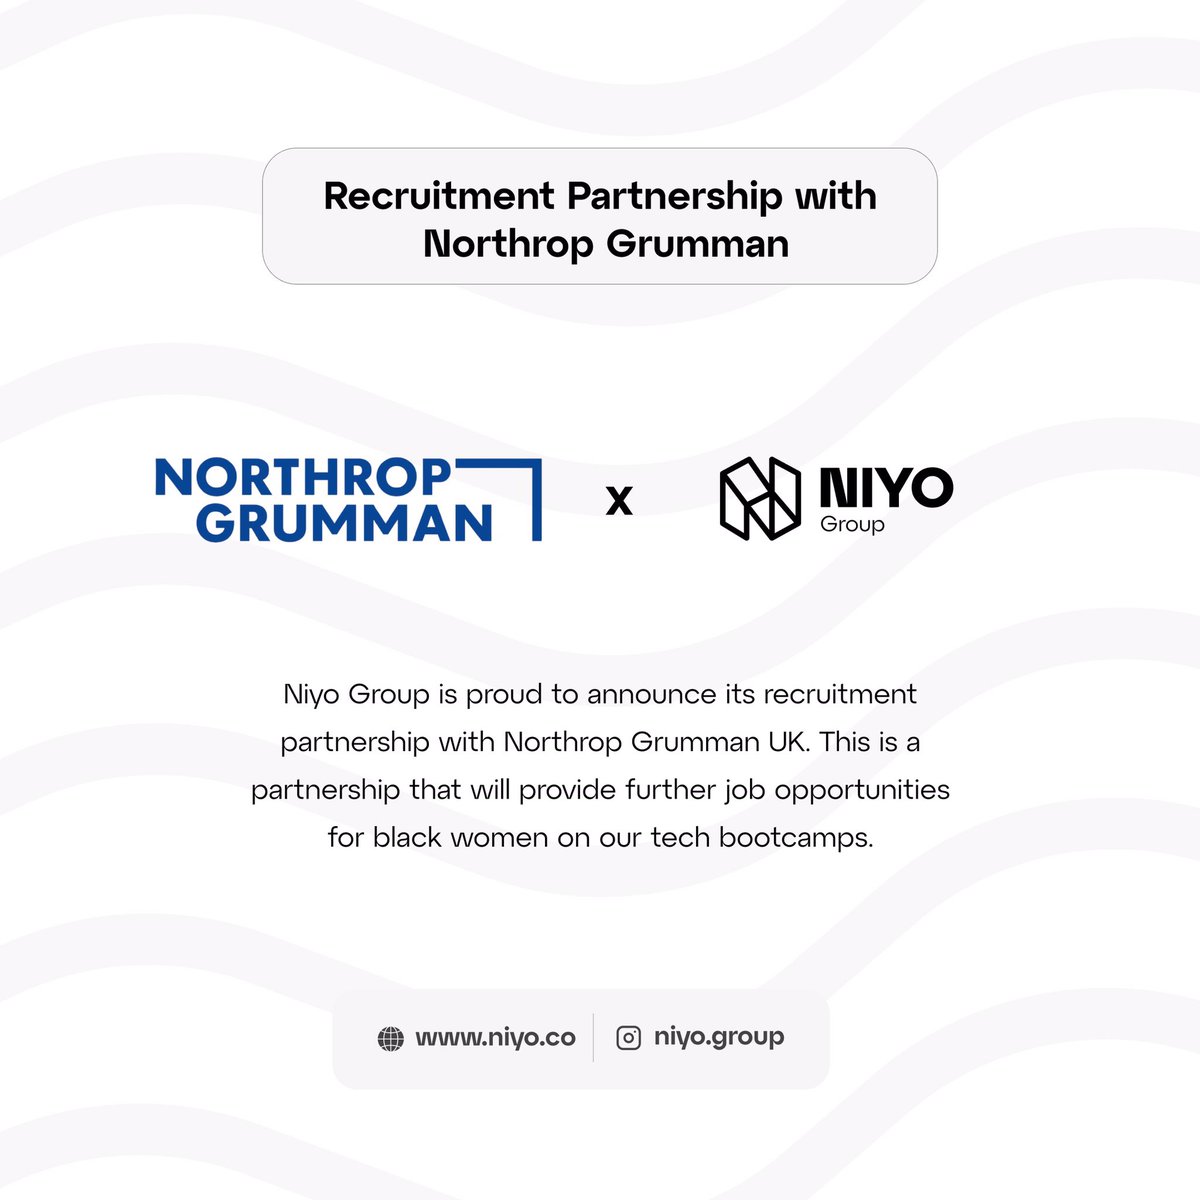 Niyo Group is proud to announce its recruitment partnership with Northrop Grumman UK. 🚀 This is a partnership that will provide further job opportunities for black women on our tech bootcamps. - Oyin Adebayo, Founder & CEO, Niyo Group. 🙌🏿 #BlackTechTwitter